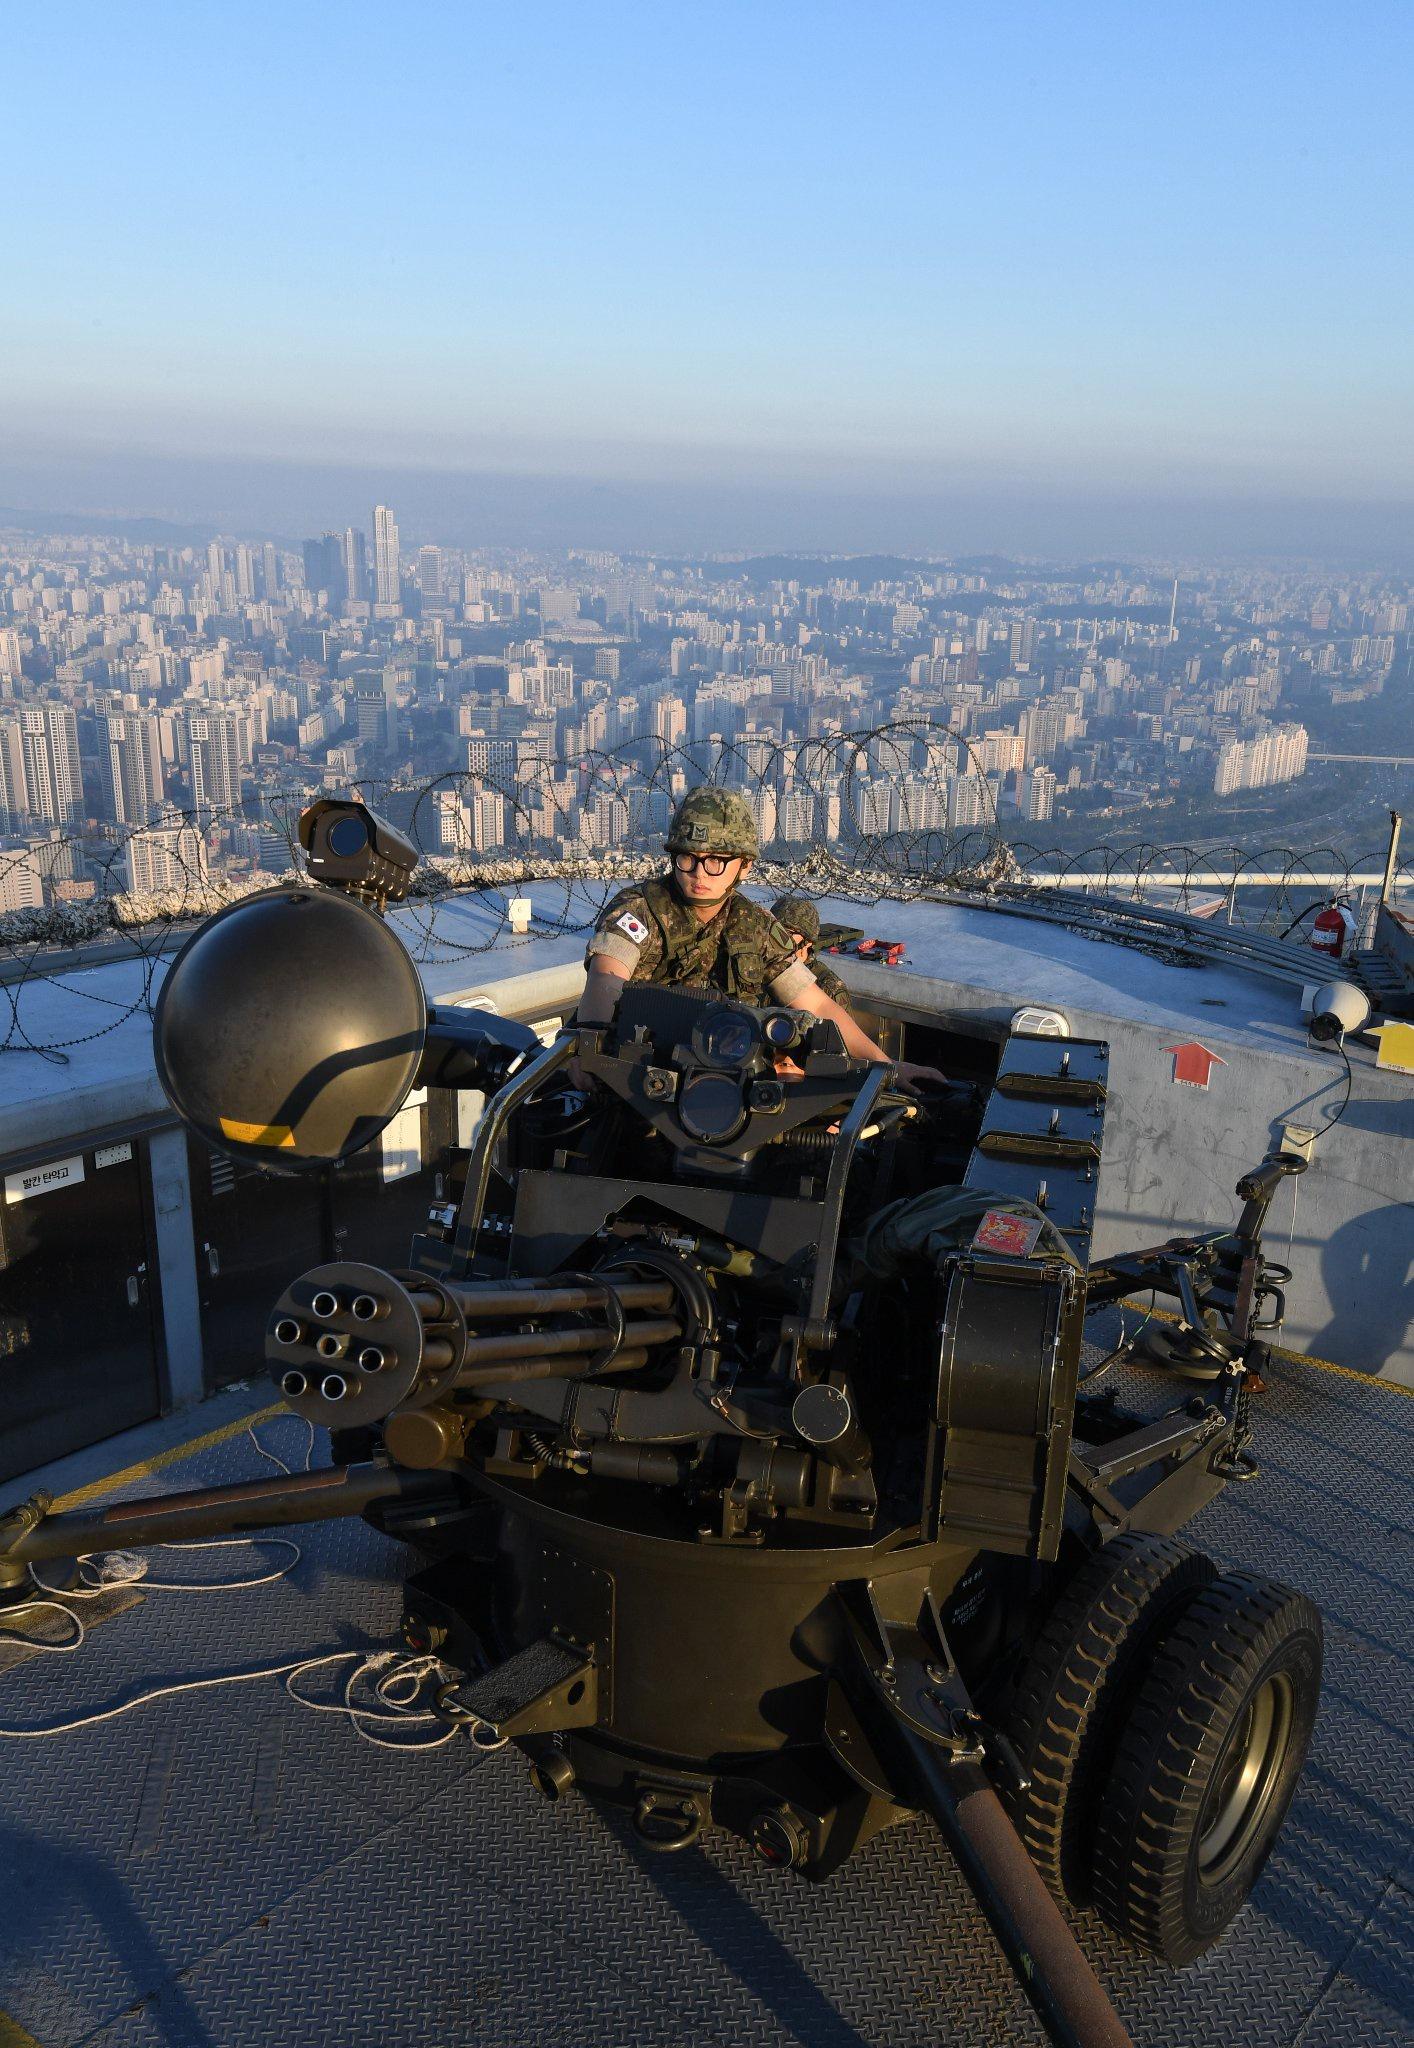 M167 VADS Air defense artillery positioned on top of skyscrapers in Seoul,  South Korea. - Album on Imgur